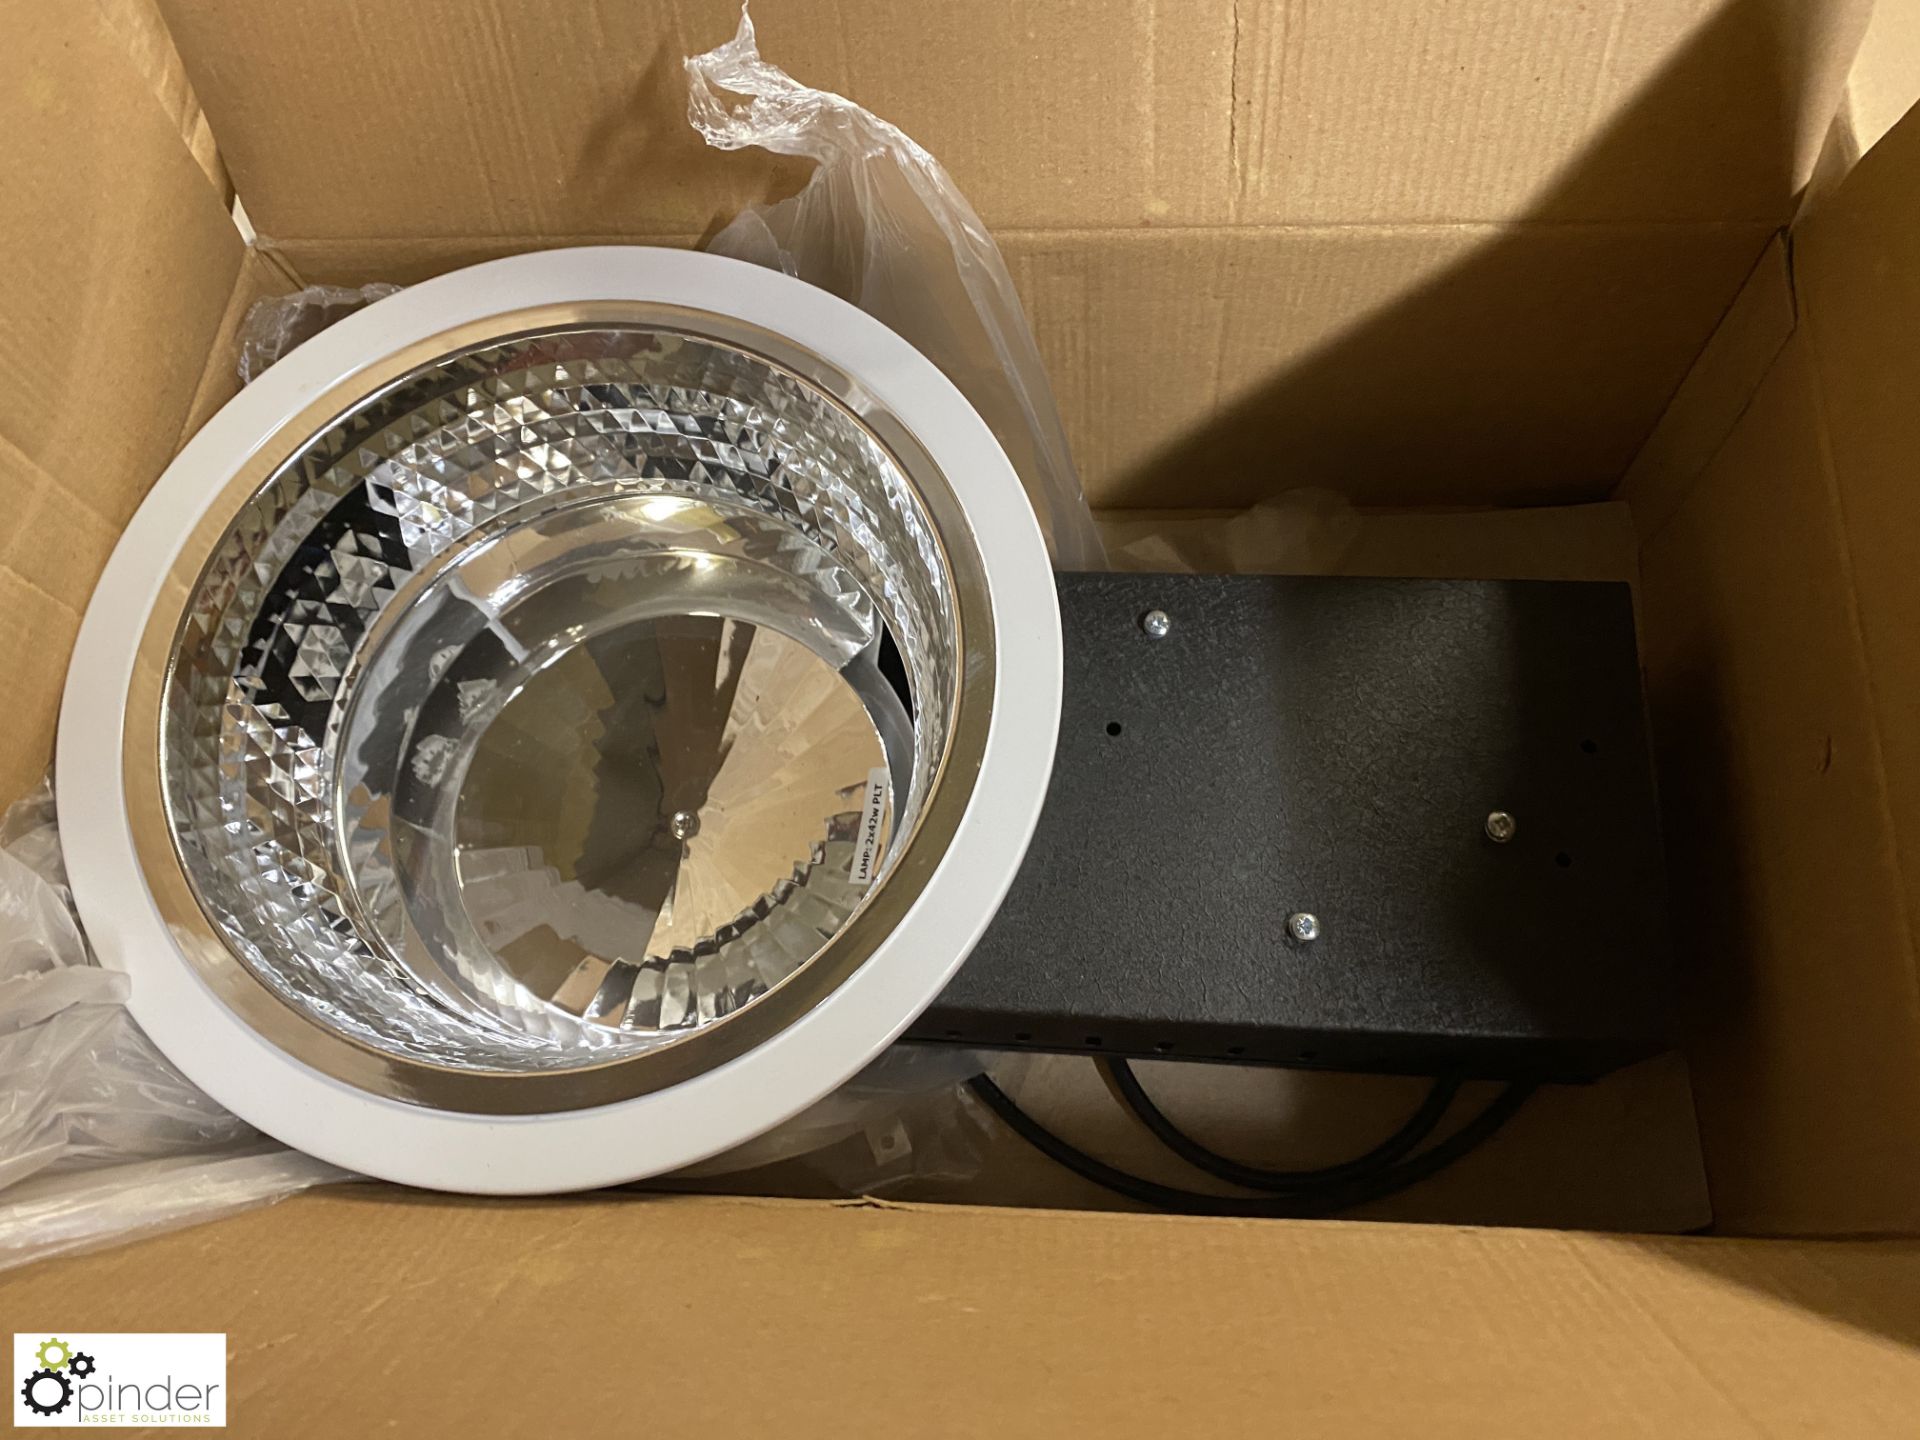 18 2x42w PLC Downlighters, product code T7DDLZ42CZ - Image 2 of 5